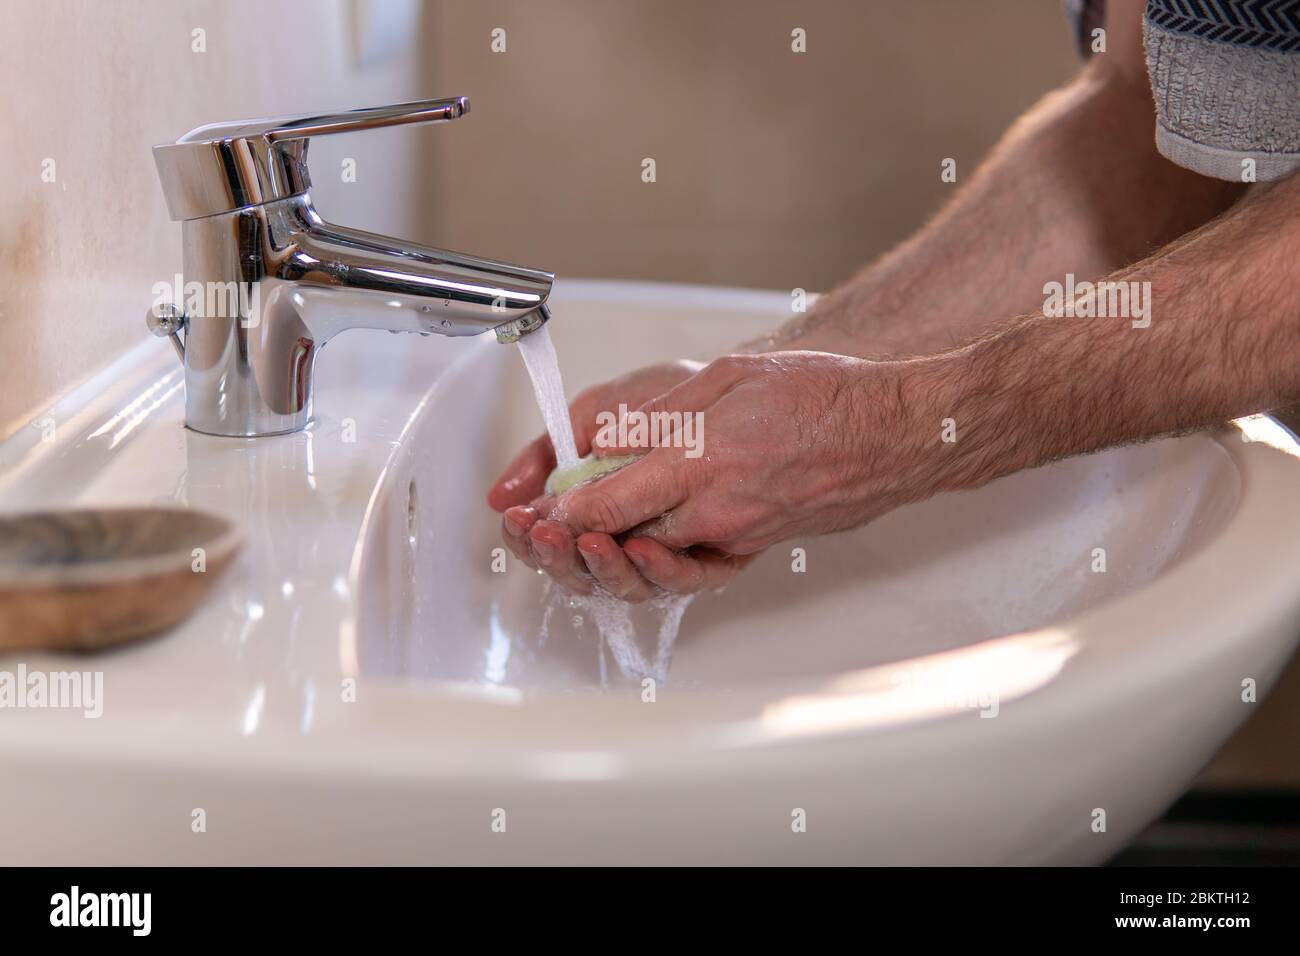 Hand of caucasian man holding antibacterial soap under running water tap. Washing hands, personal hygiene, hand sanitizing to prevent illnesses Stock Photo